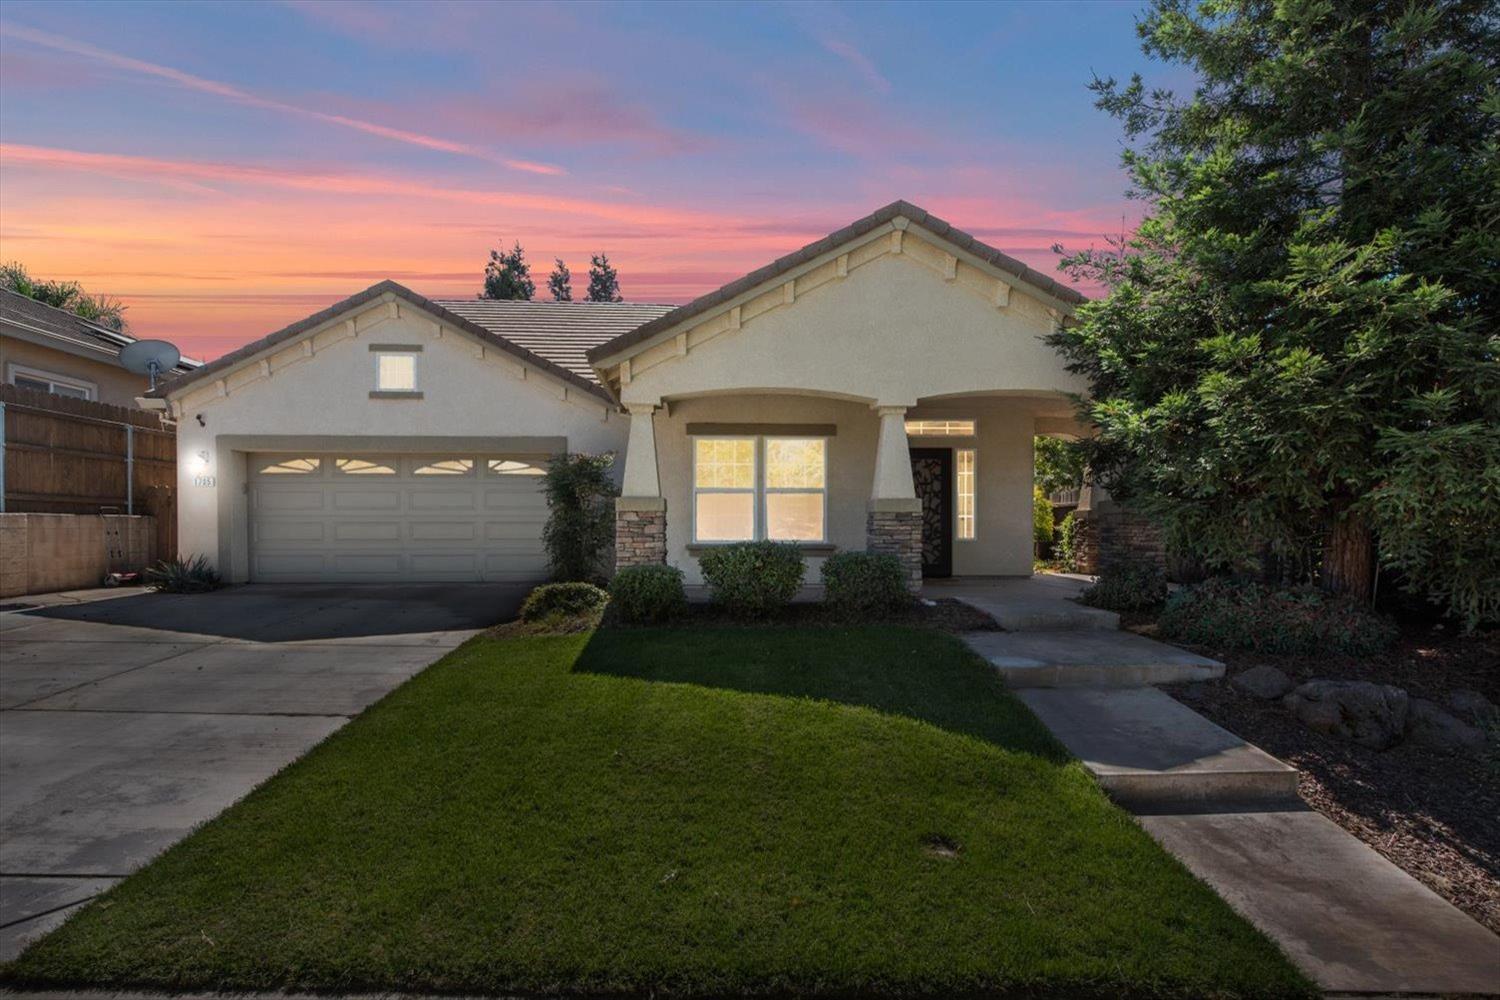 Photo of 1705 Bandon Ct in Oakdale, CA